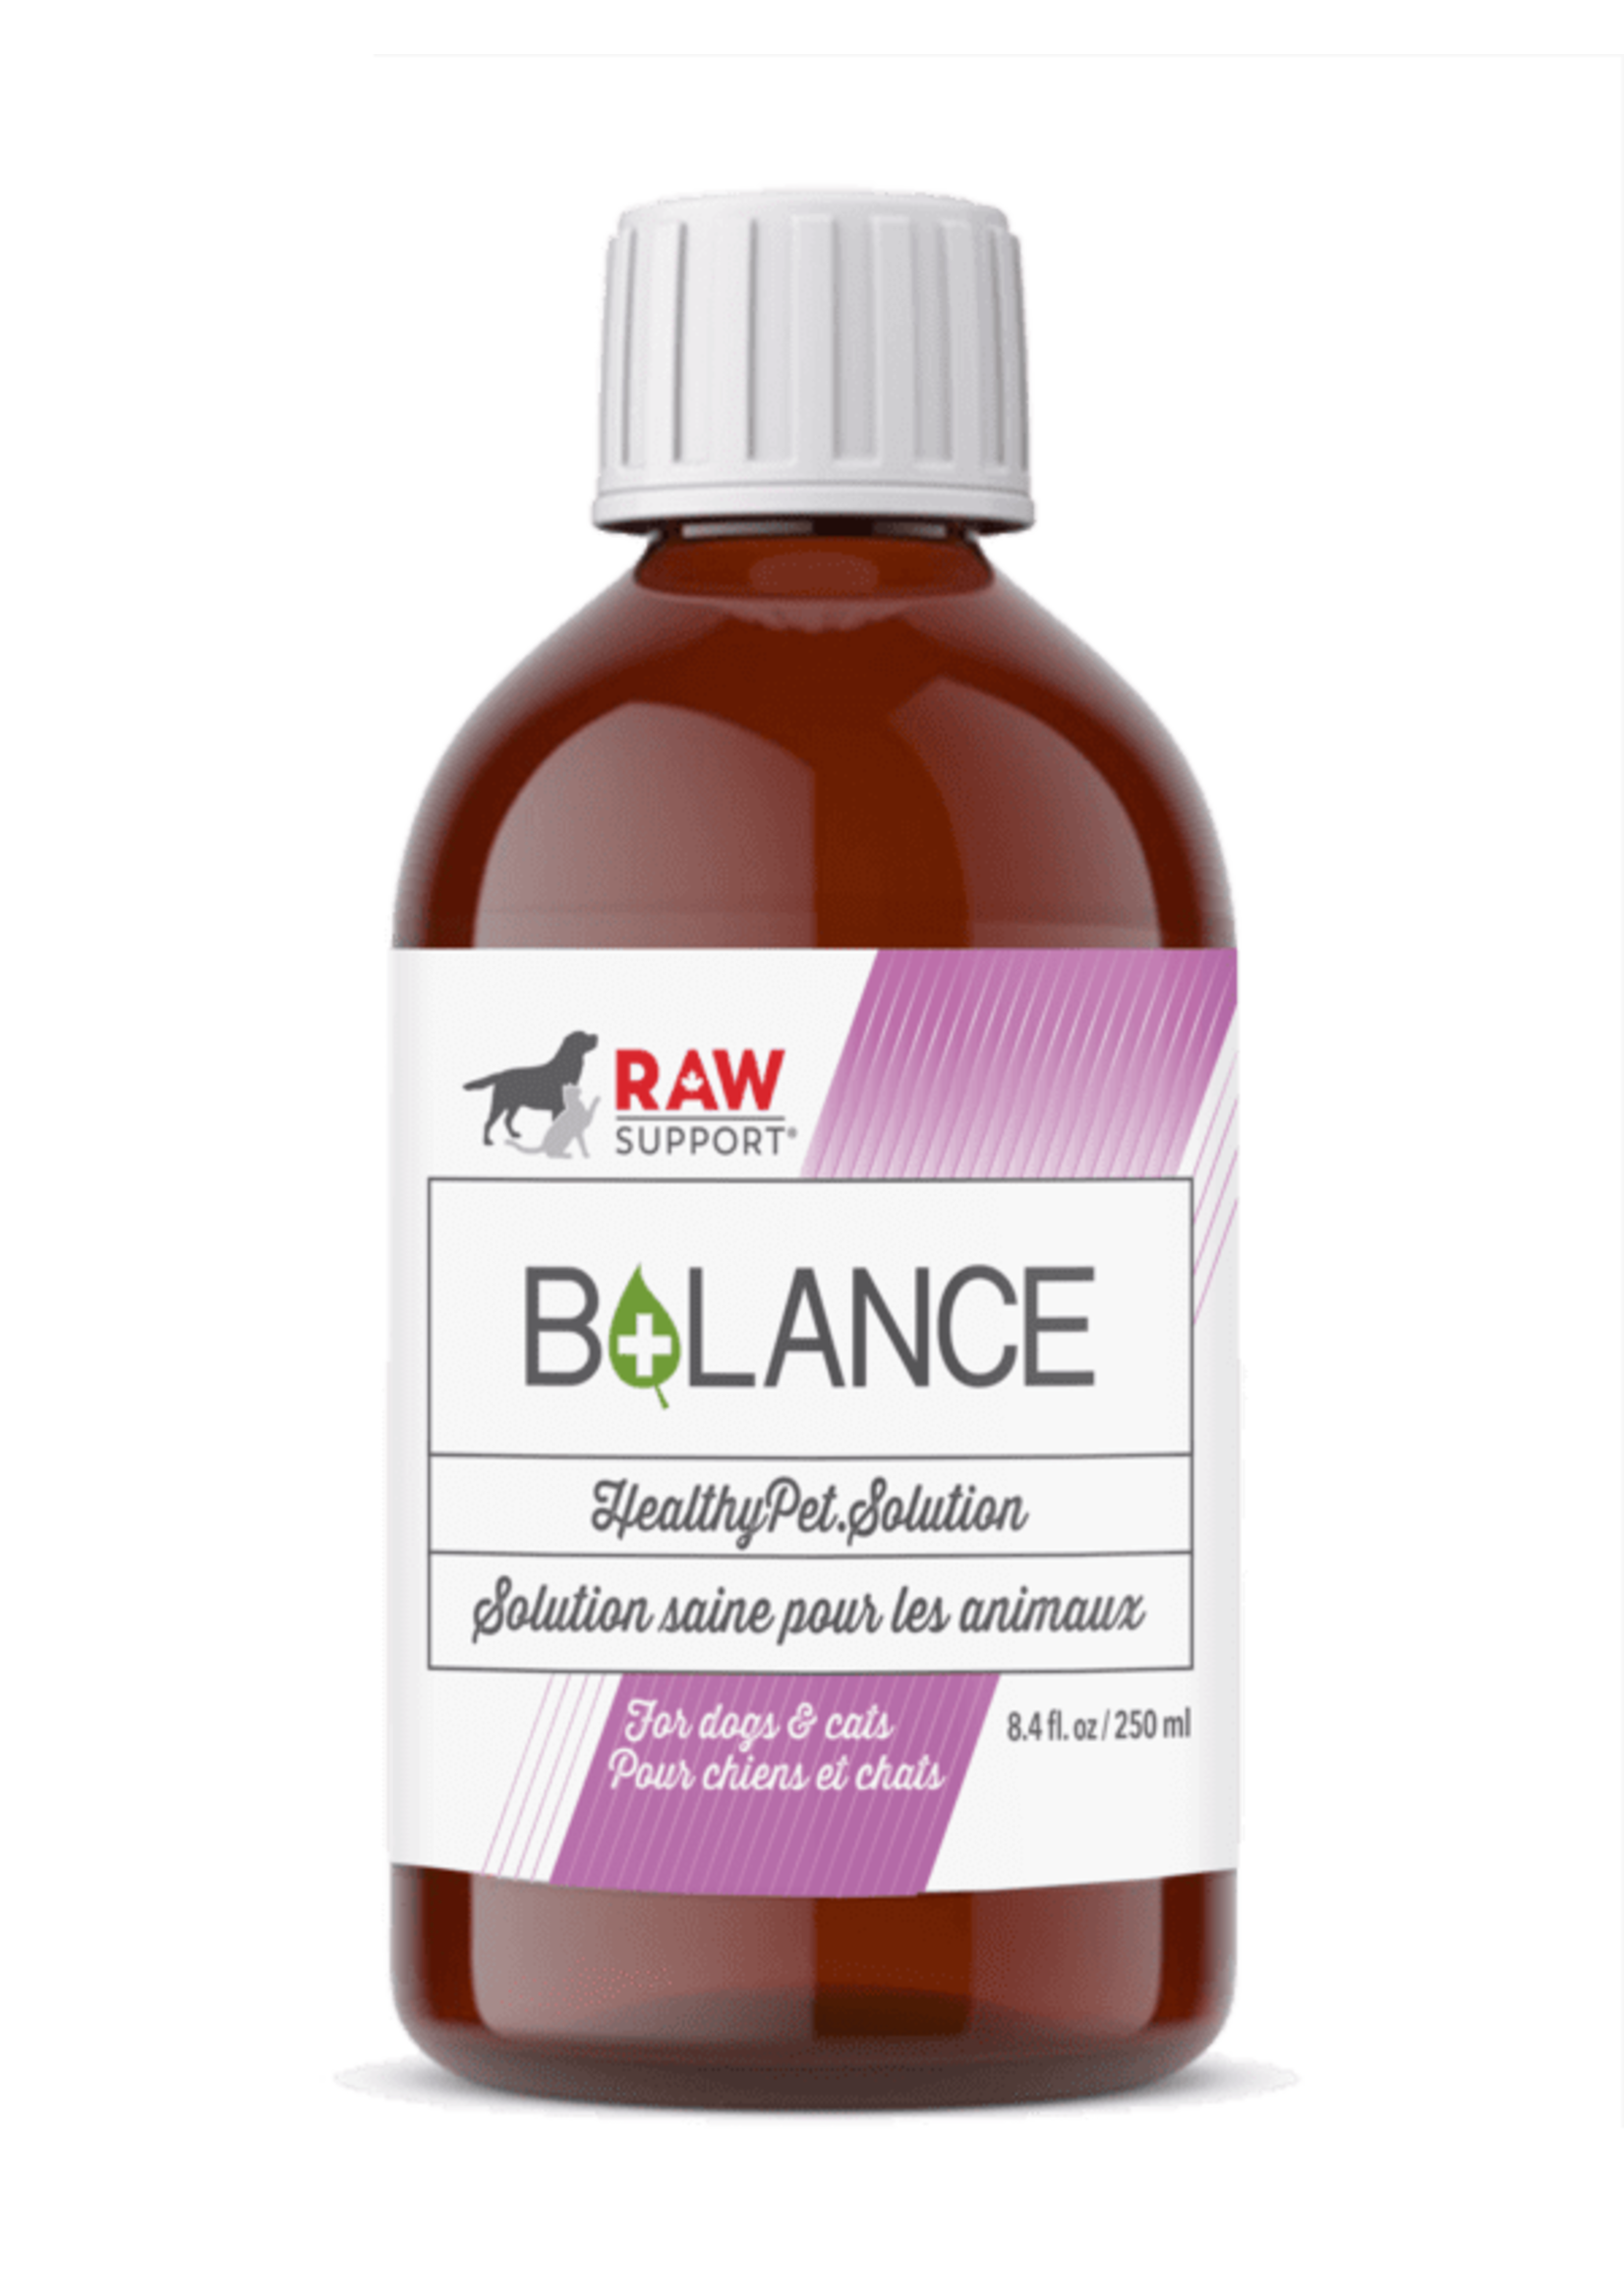 Raw Support Raw Support B+lance 250ml